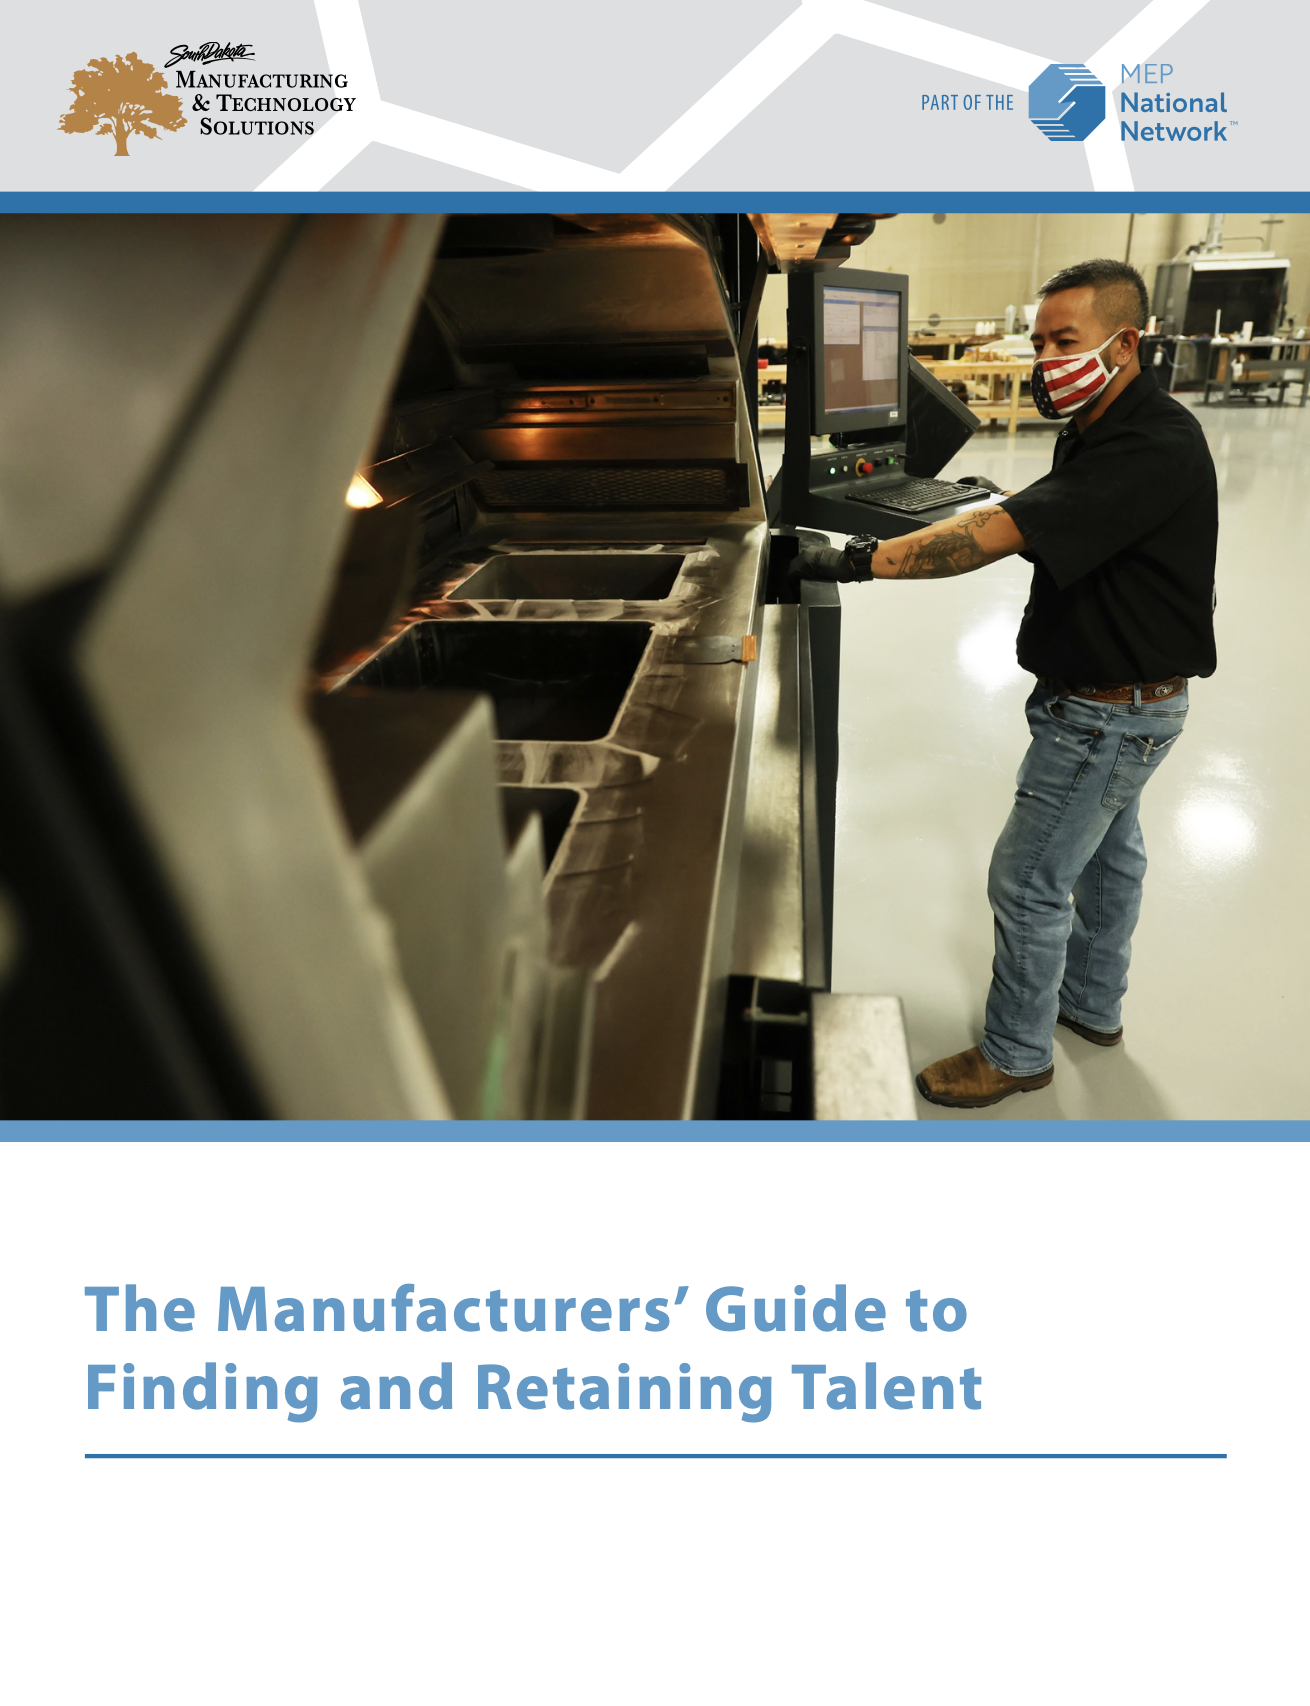 Manufacturers' Guide to Finding and Retaining Talent